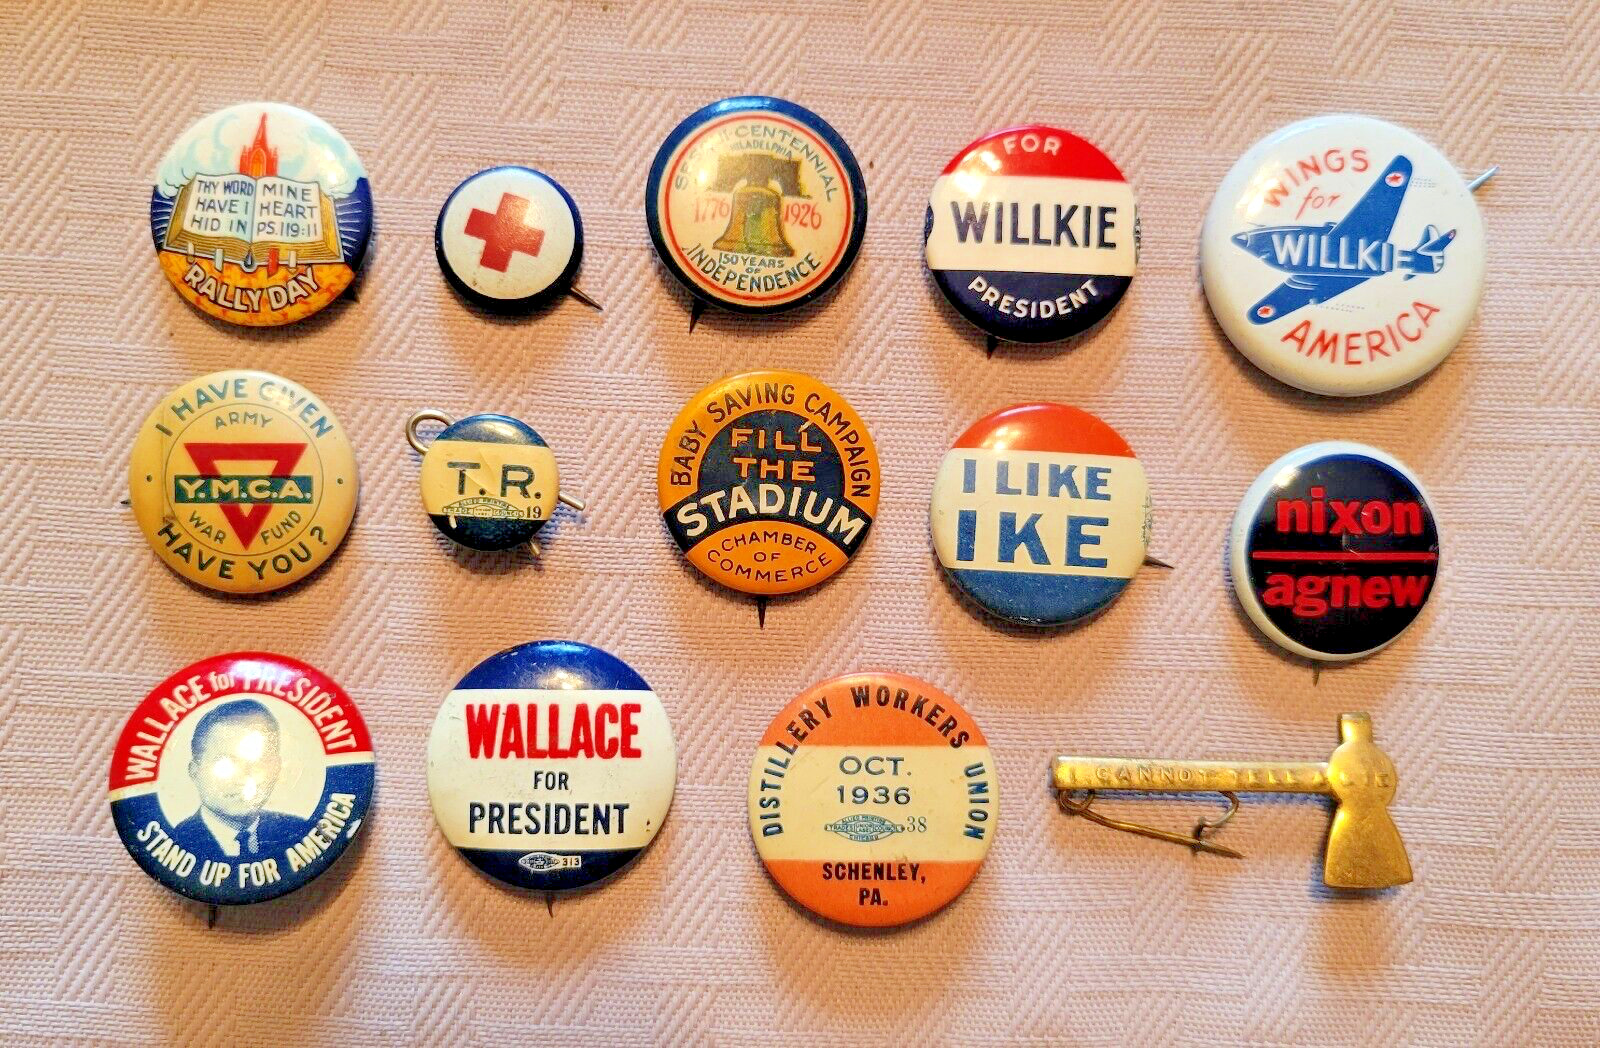 Lot of Old Political Buttons-Willkie, Nixon 1926 1936, Army, I Like Ike, Wallace